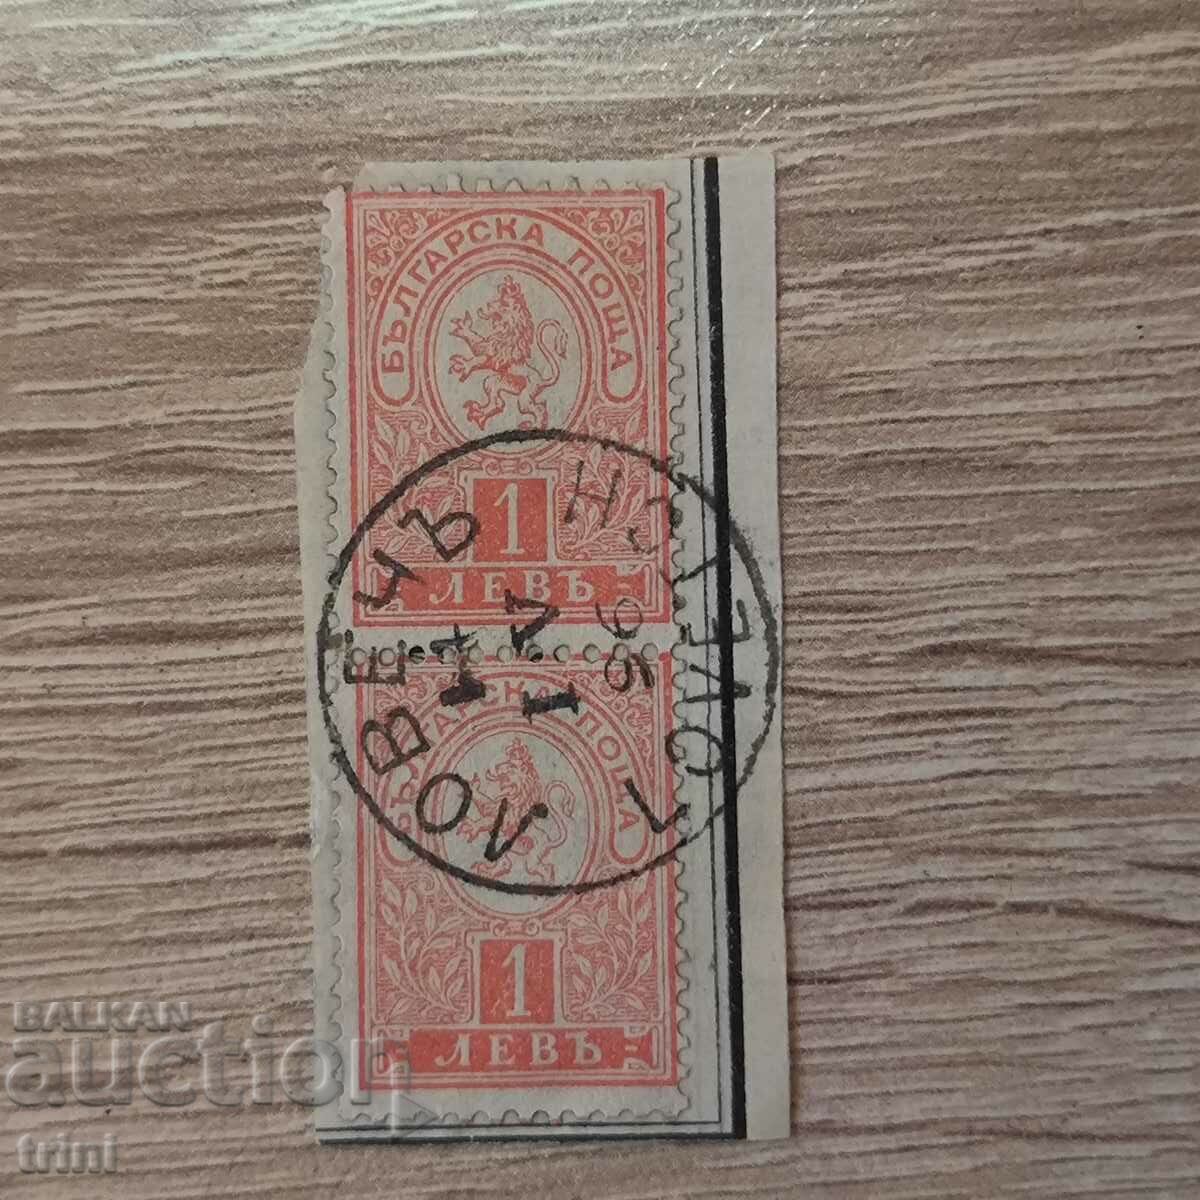 Small lion 1889 2 x 1 lion stamp Lovech